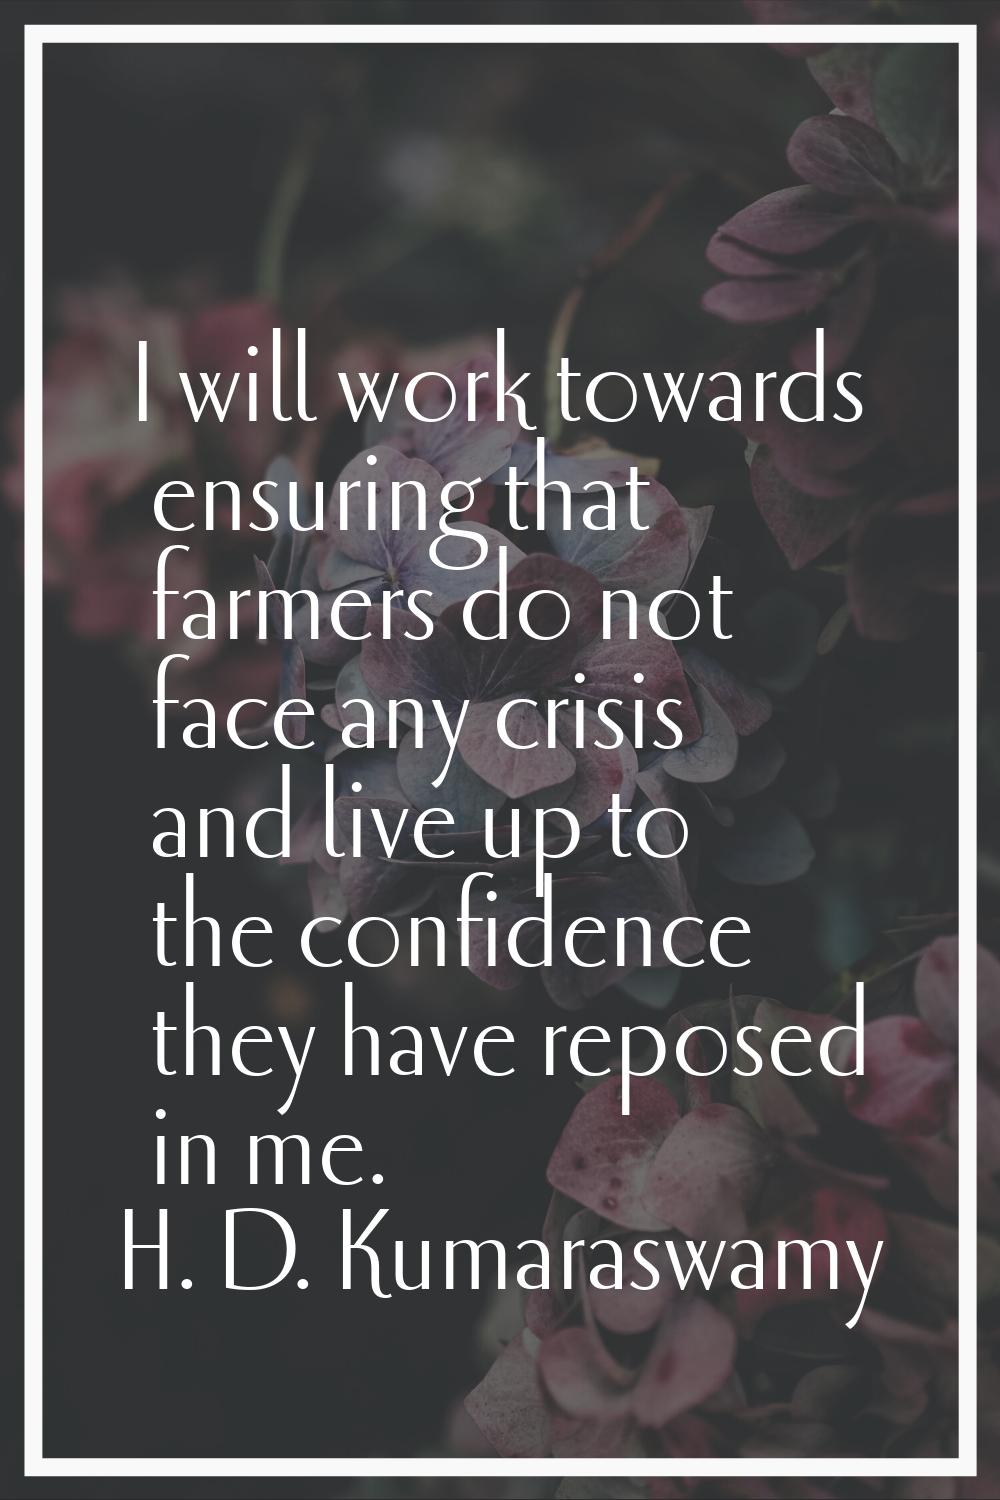 I will work towards ensuring that farmers do not face any crisis and live up to the confidence they